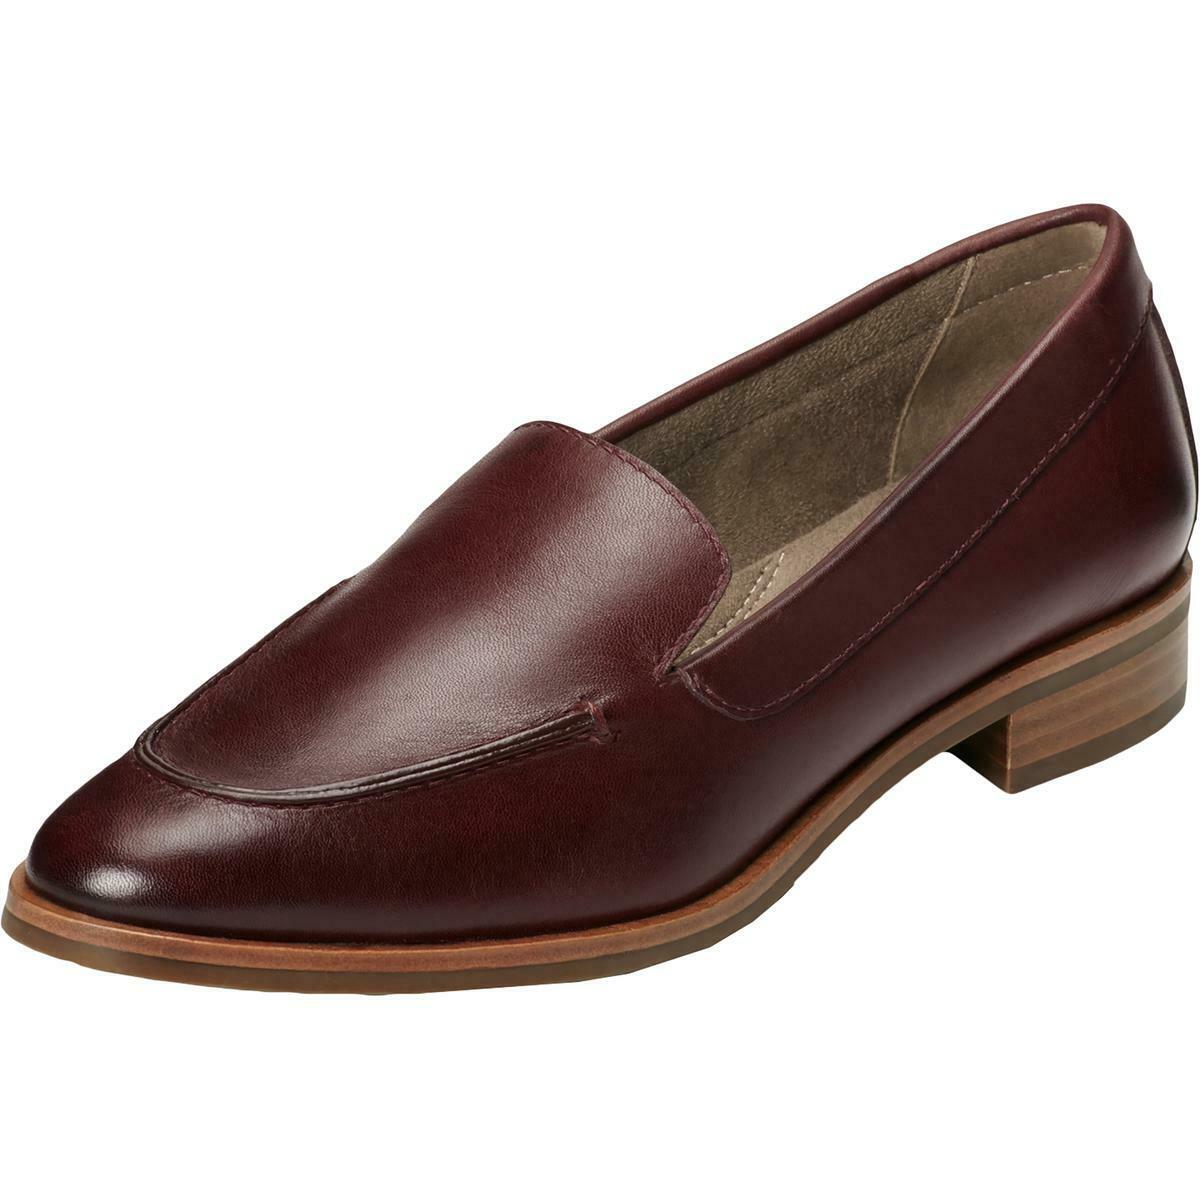 Aerosoles Womens East Side Red Leather Loafers Shoes 9 Medium (B,M) BHFO 2790